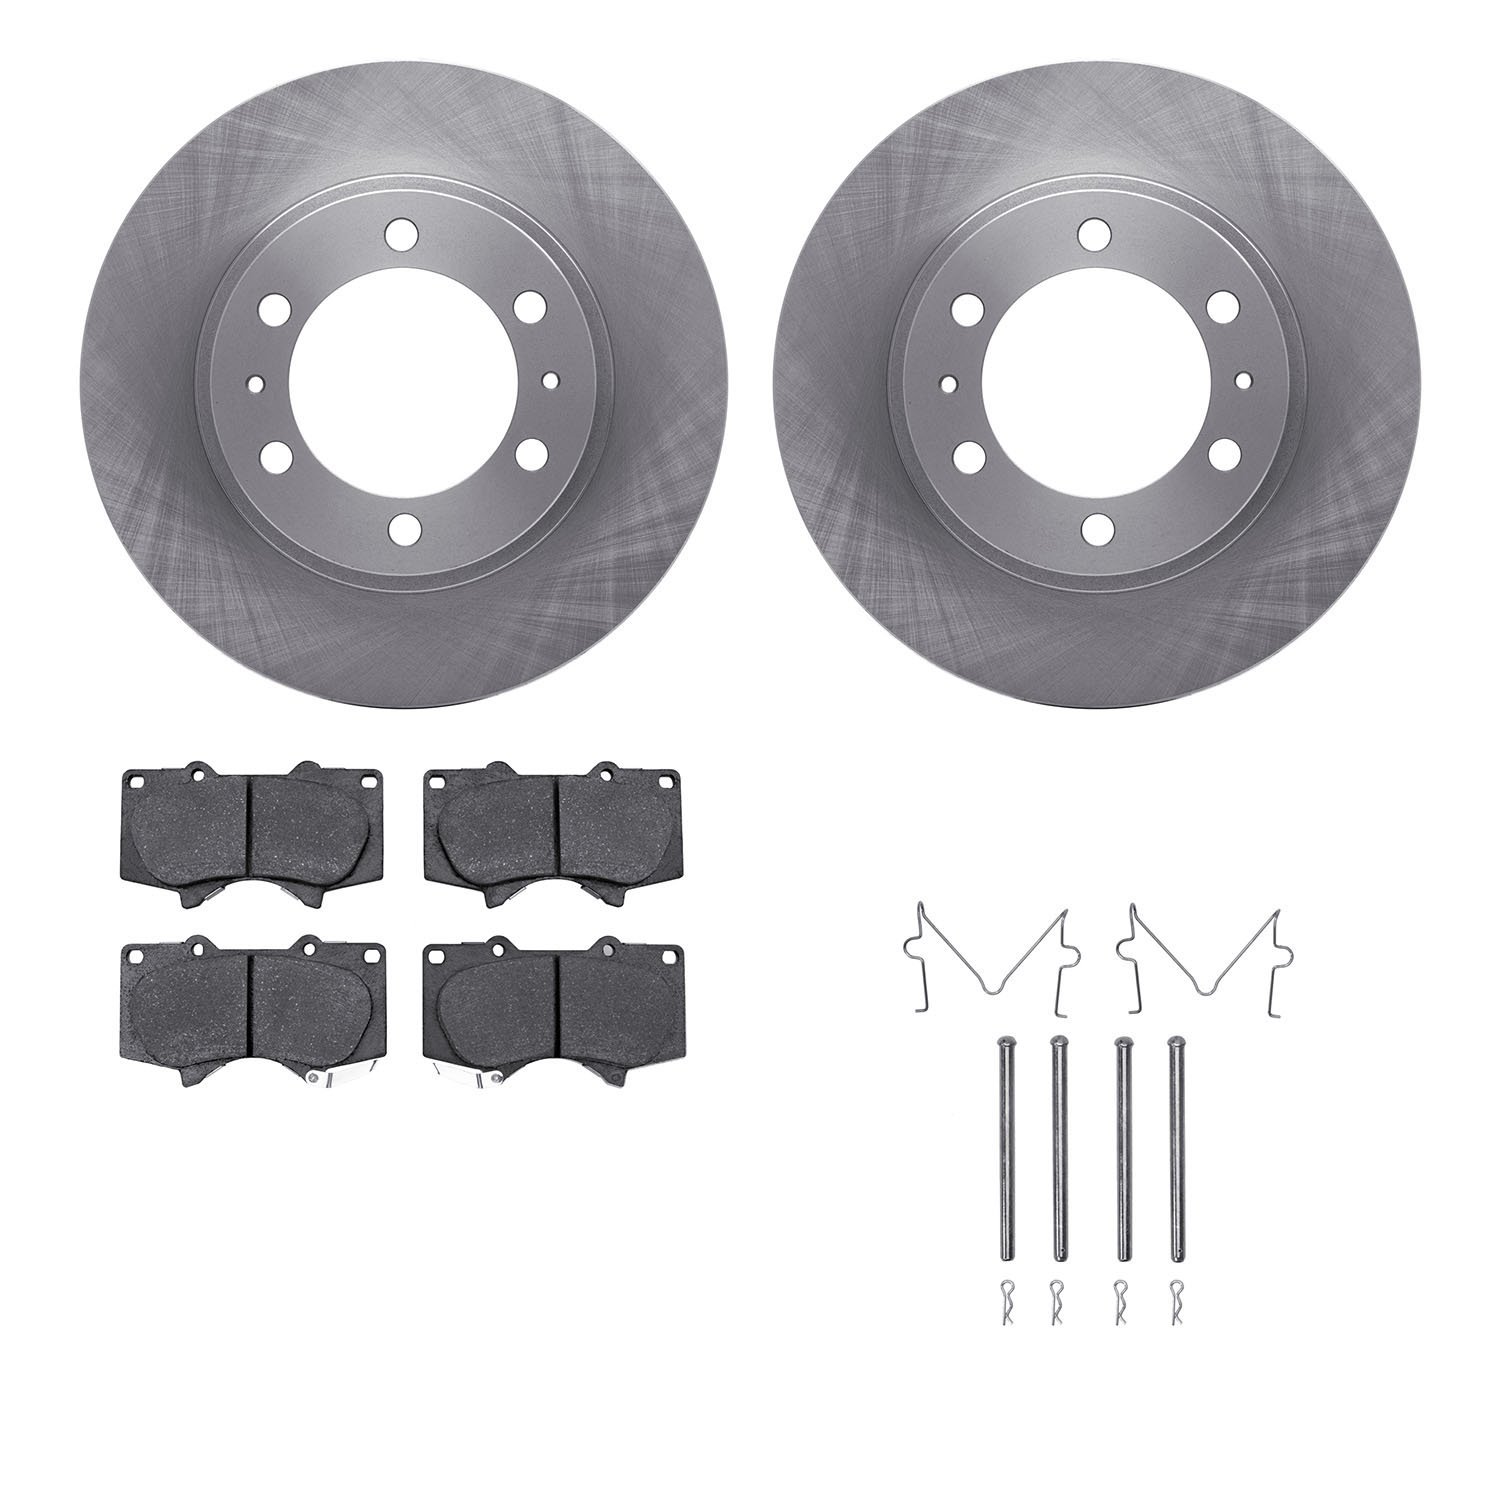 6412-76049 Brake Rotors with Ultimate-Duty Brake Pads Kit & Hardware, Fits Select Lexus/Toyota/Scion, Position: Front